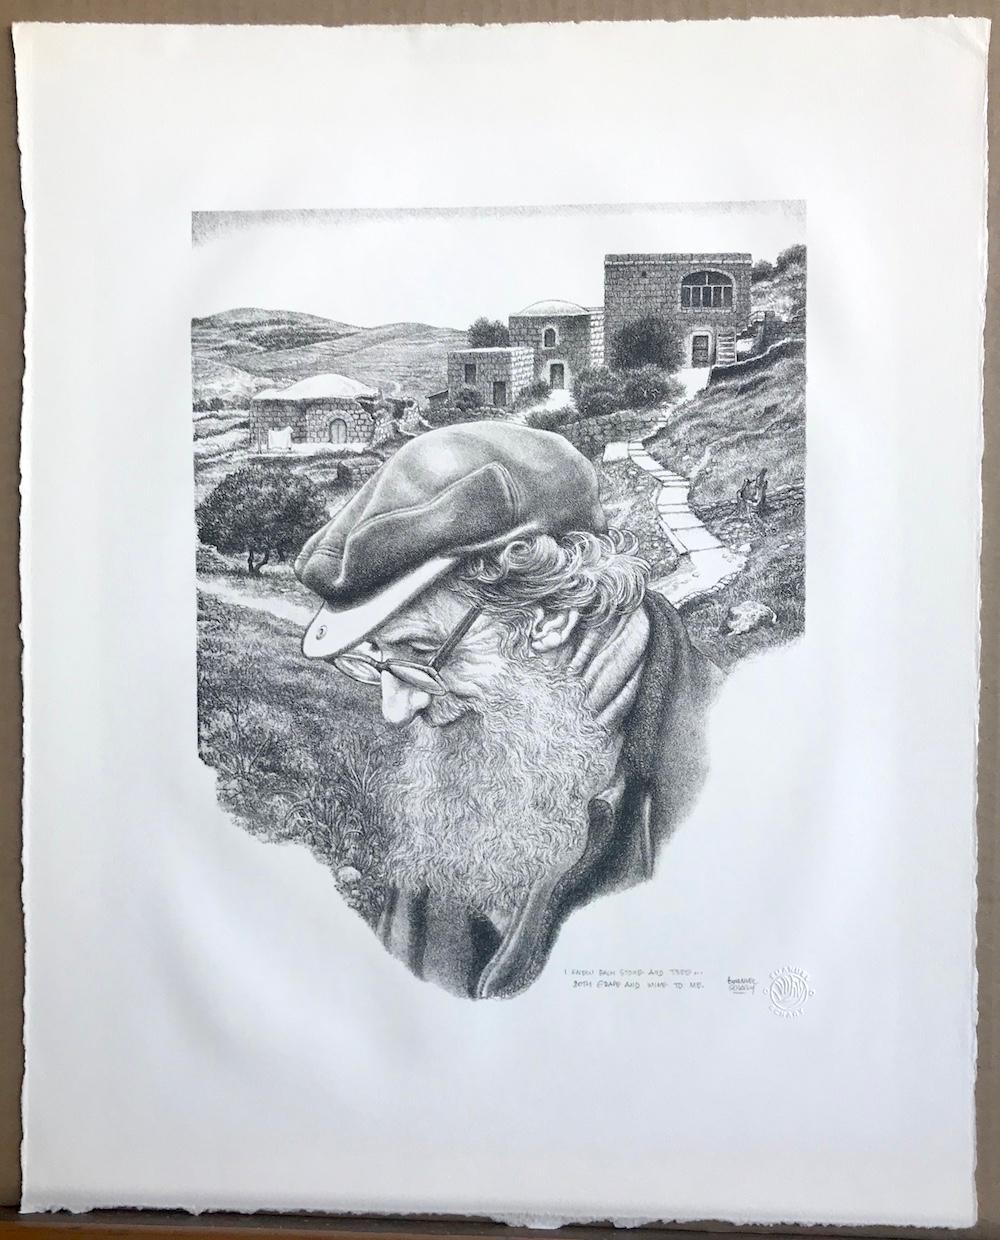 I KNEW EACH STONE AND TREE Signed Lithograph, Bearded Man, Biblical Landscape - Realist Print by Emanuel Schary